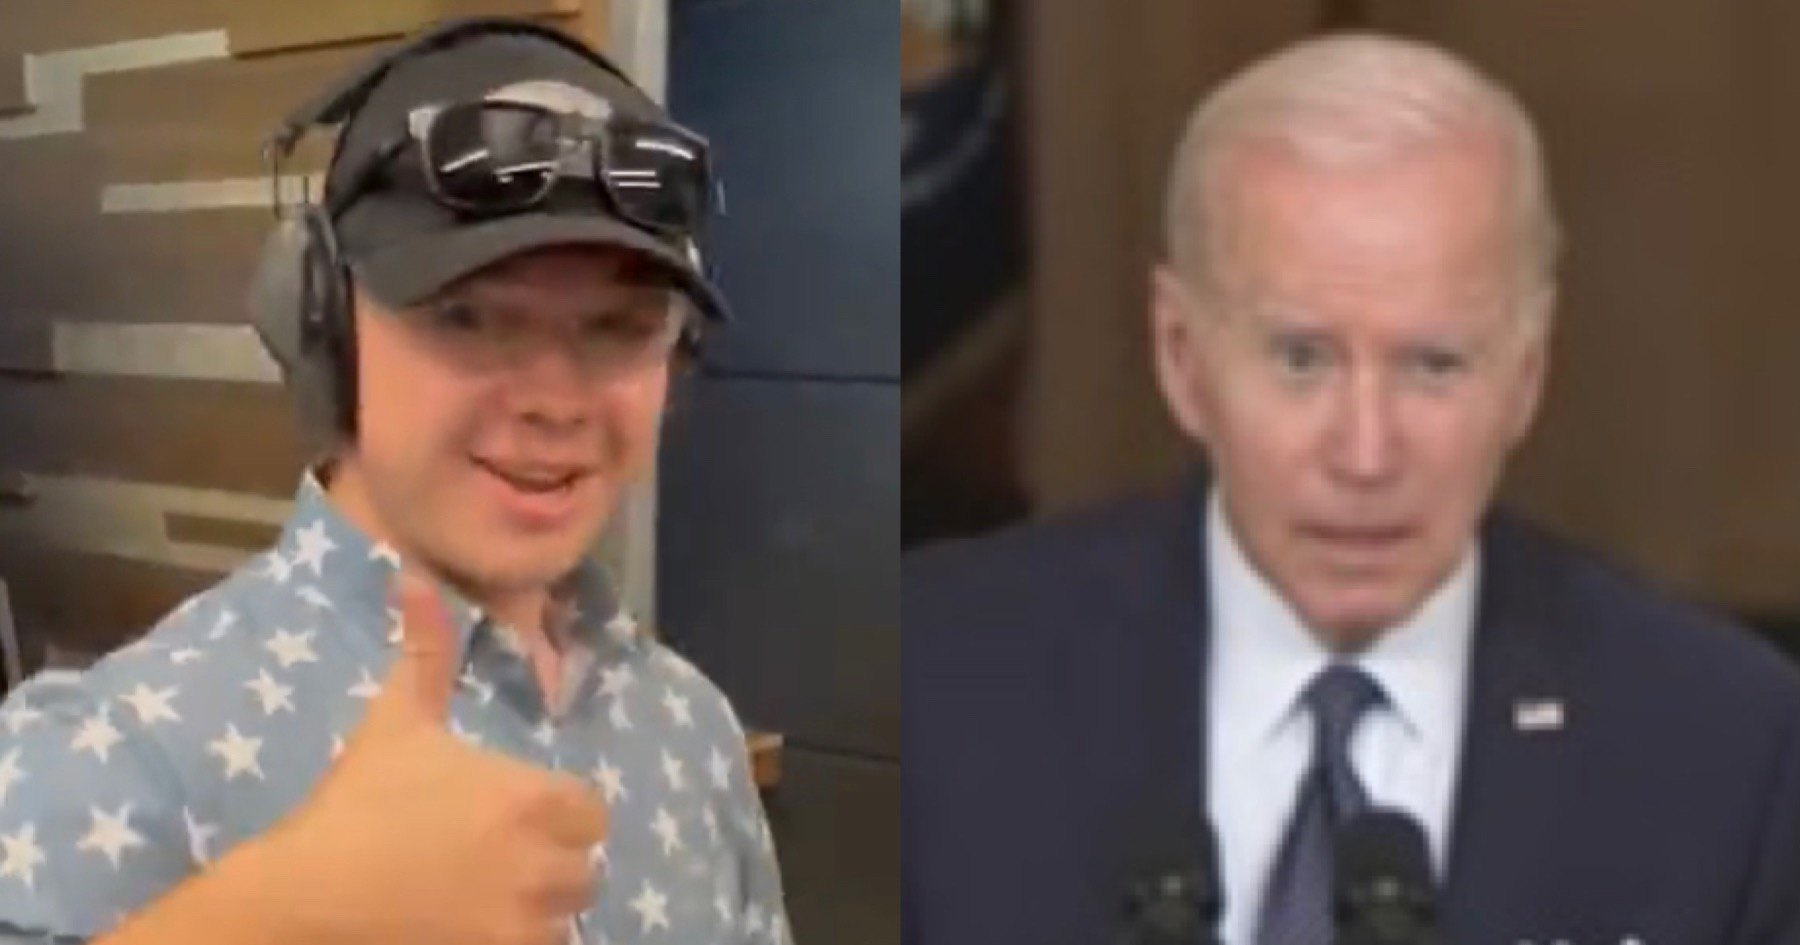 Kyle Rittenhouse Sends Message to Joe Biden in Target Practice Video: 'You're Not Coming For Our Guns' - Media Right News